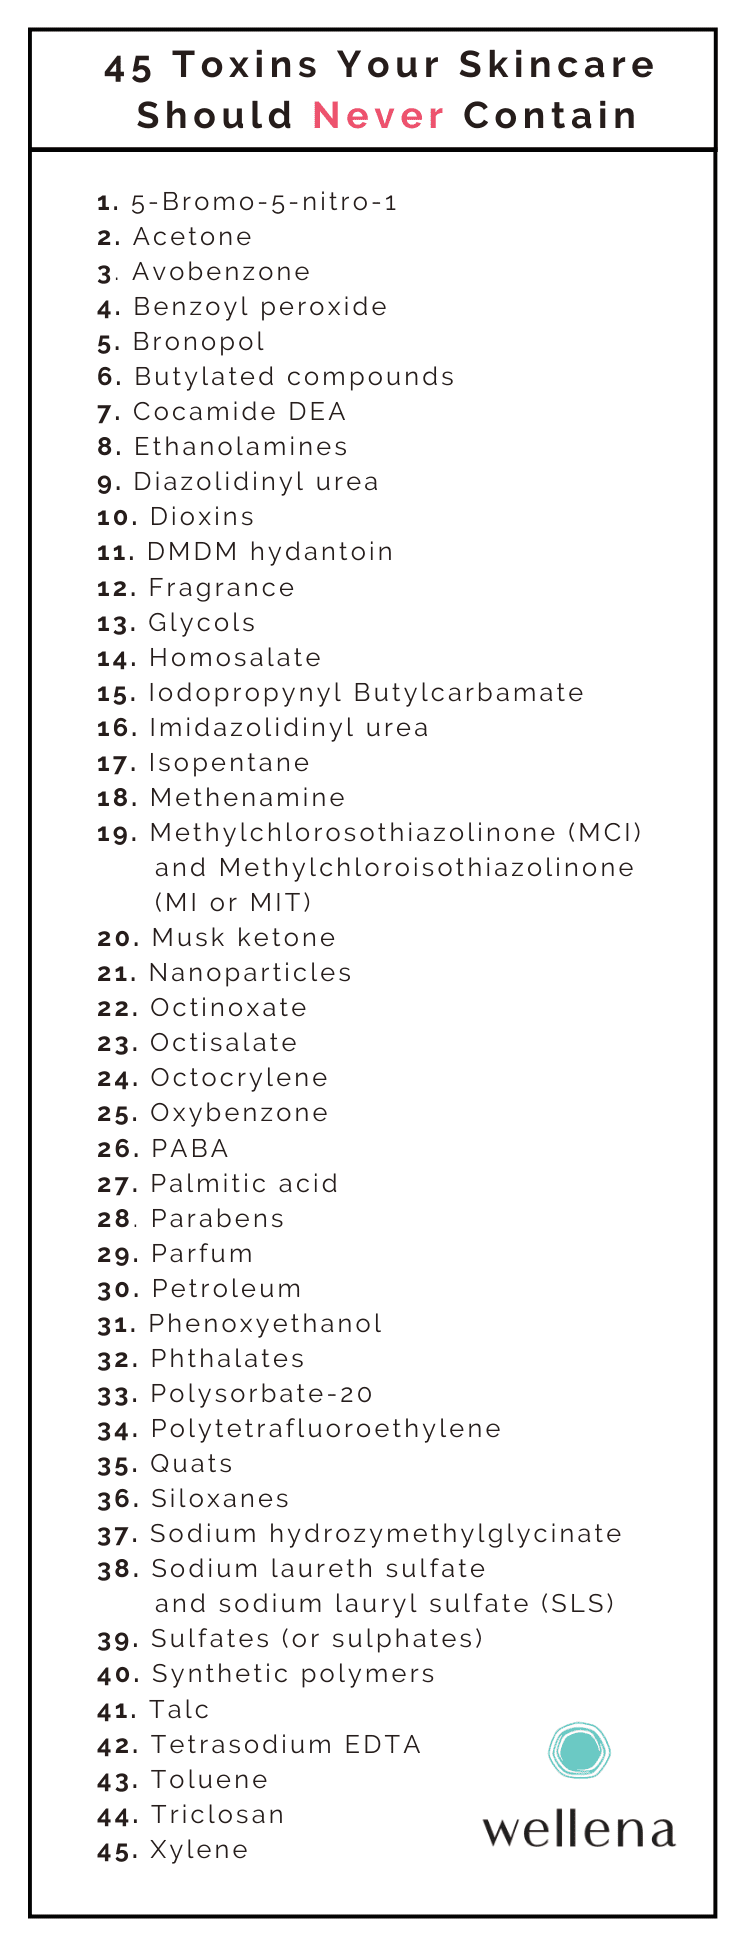 Here’s a printable checklist of what your skin care products should NEVER contain